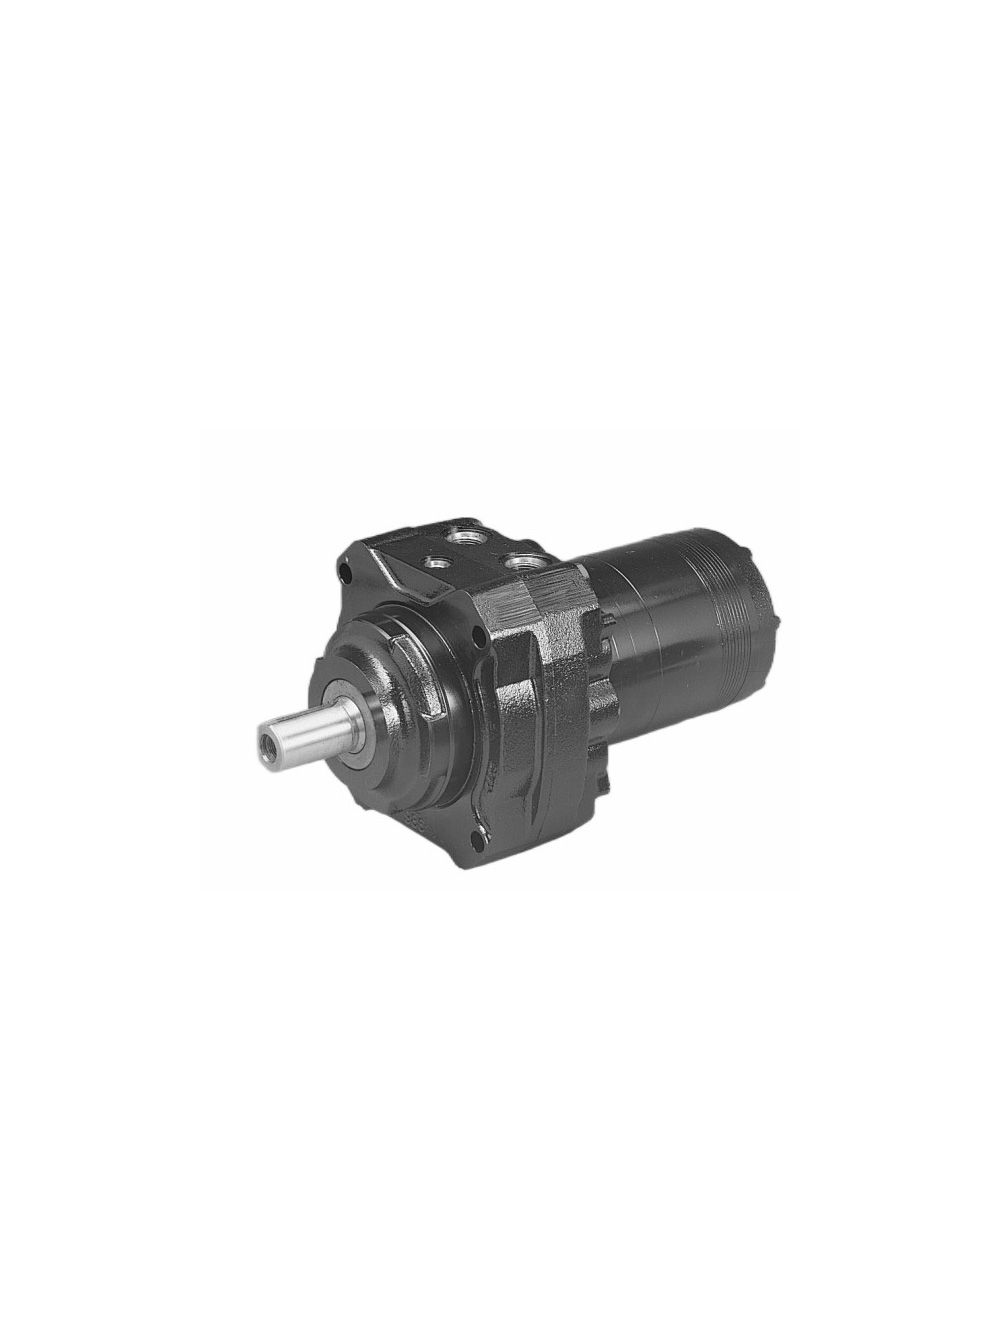 New In stock for sale, PARKER Hydraulic Motor BH-0240